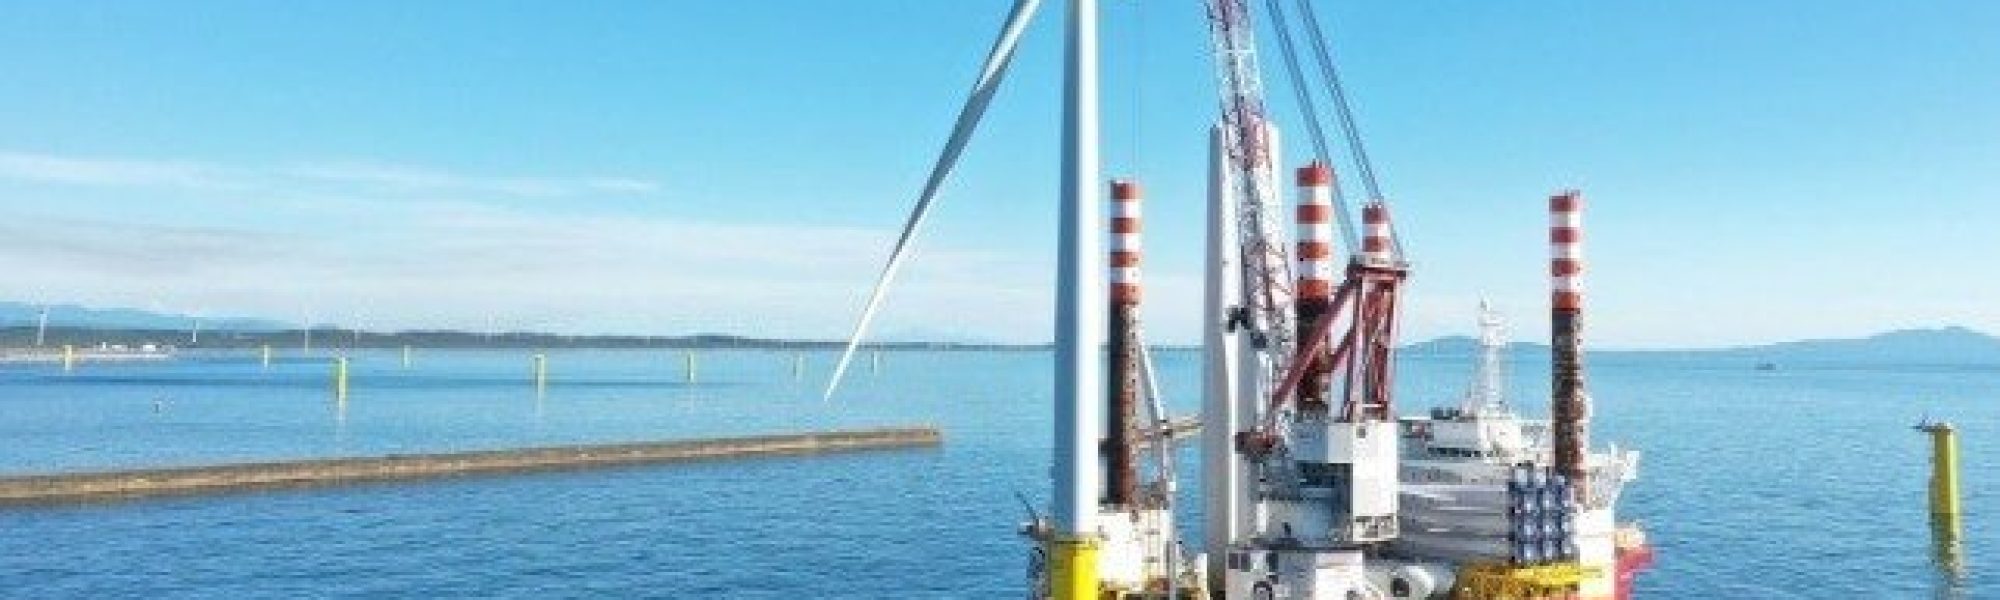 Japan’s First Commercial-Scale Offshore Wind Farm Completed